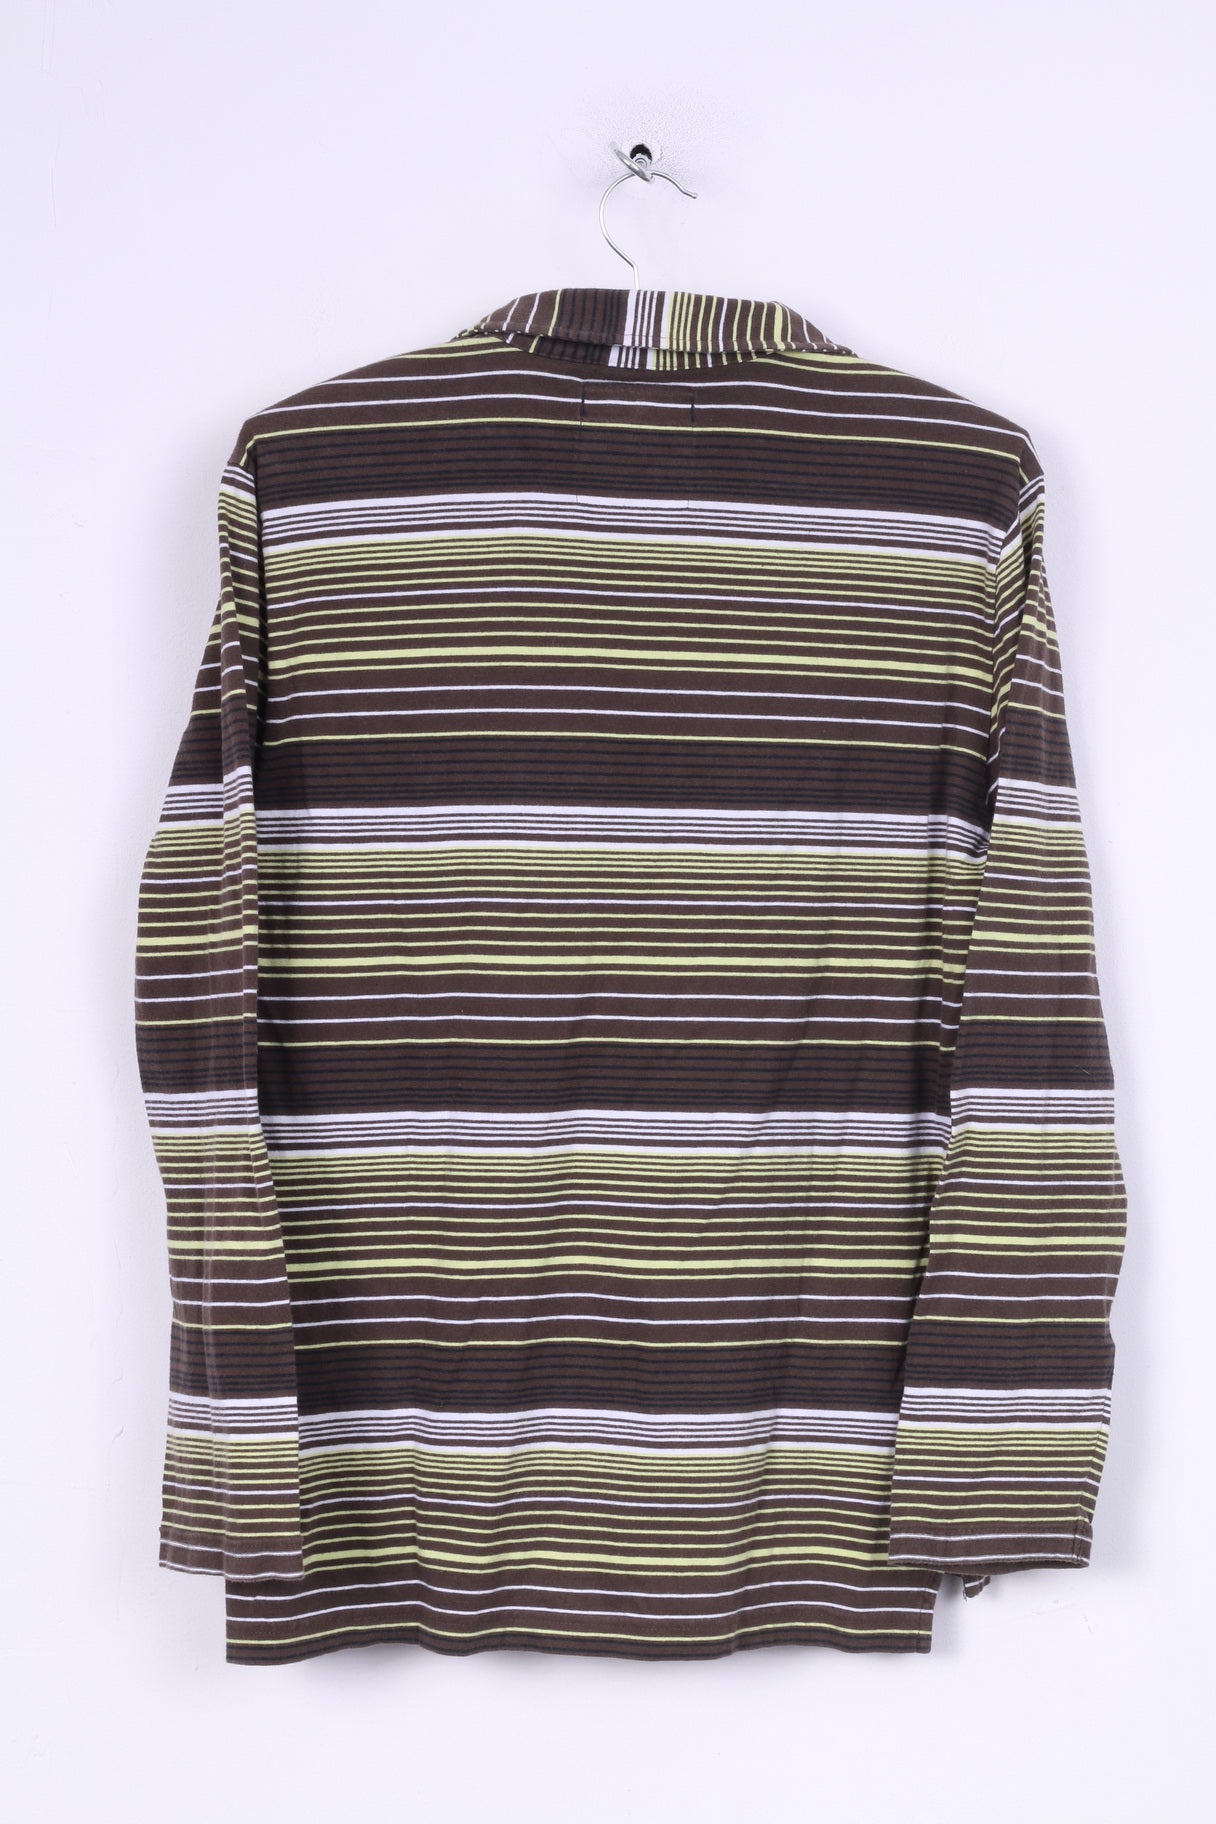 Gas Mens S Polo Shirt Brown Striped Long Sleeve Cotton